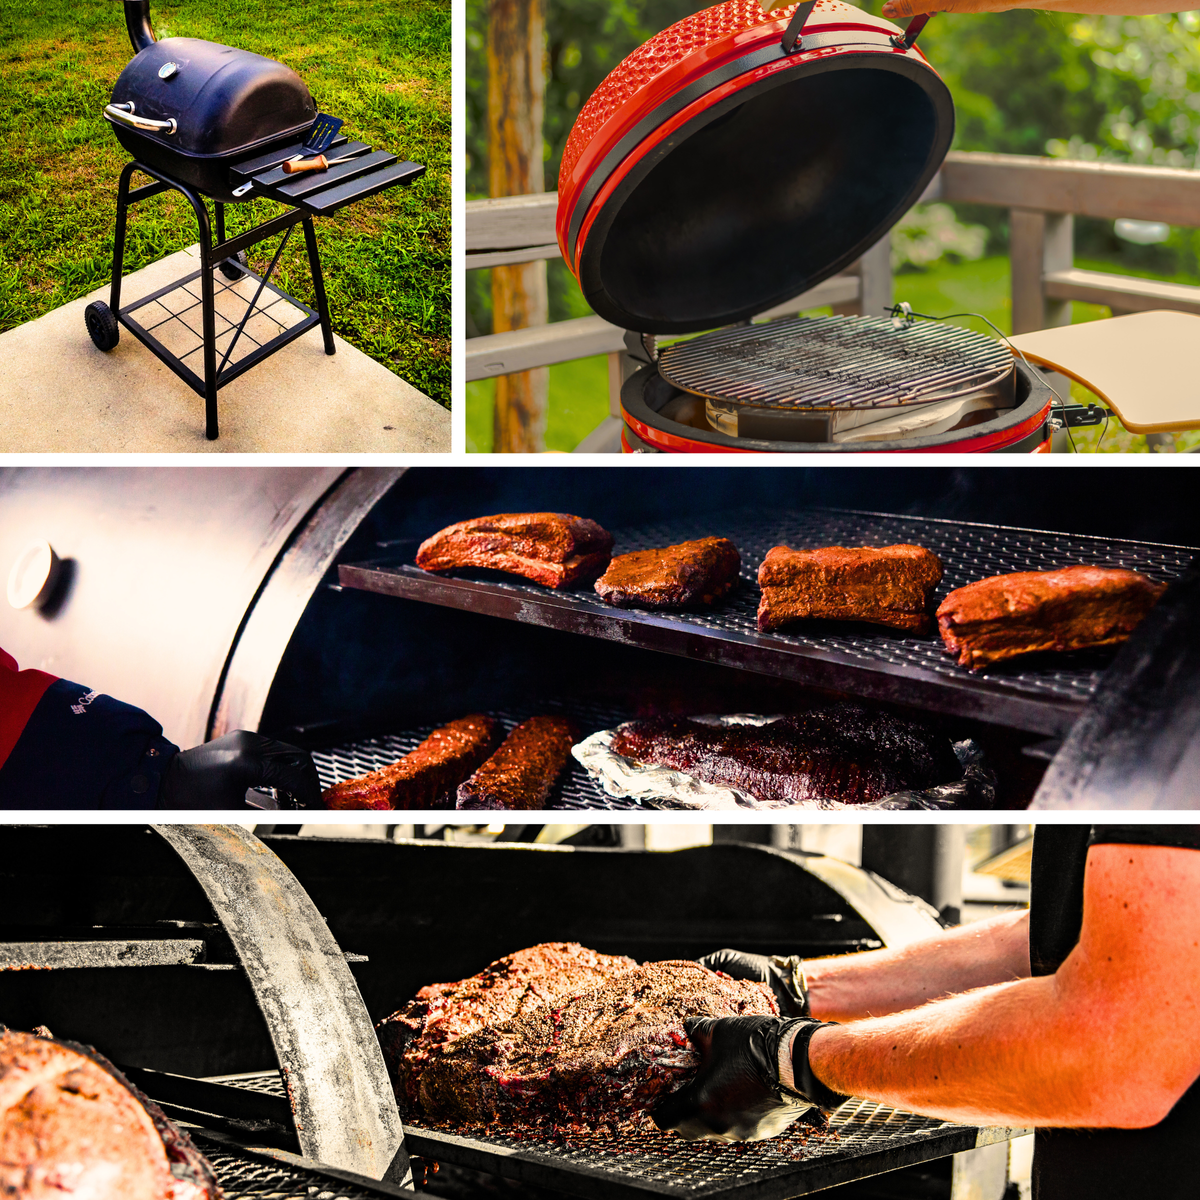 Four images of smokers and grills in operation